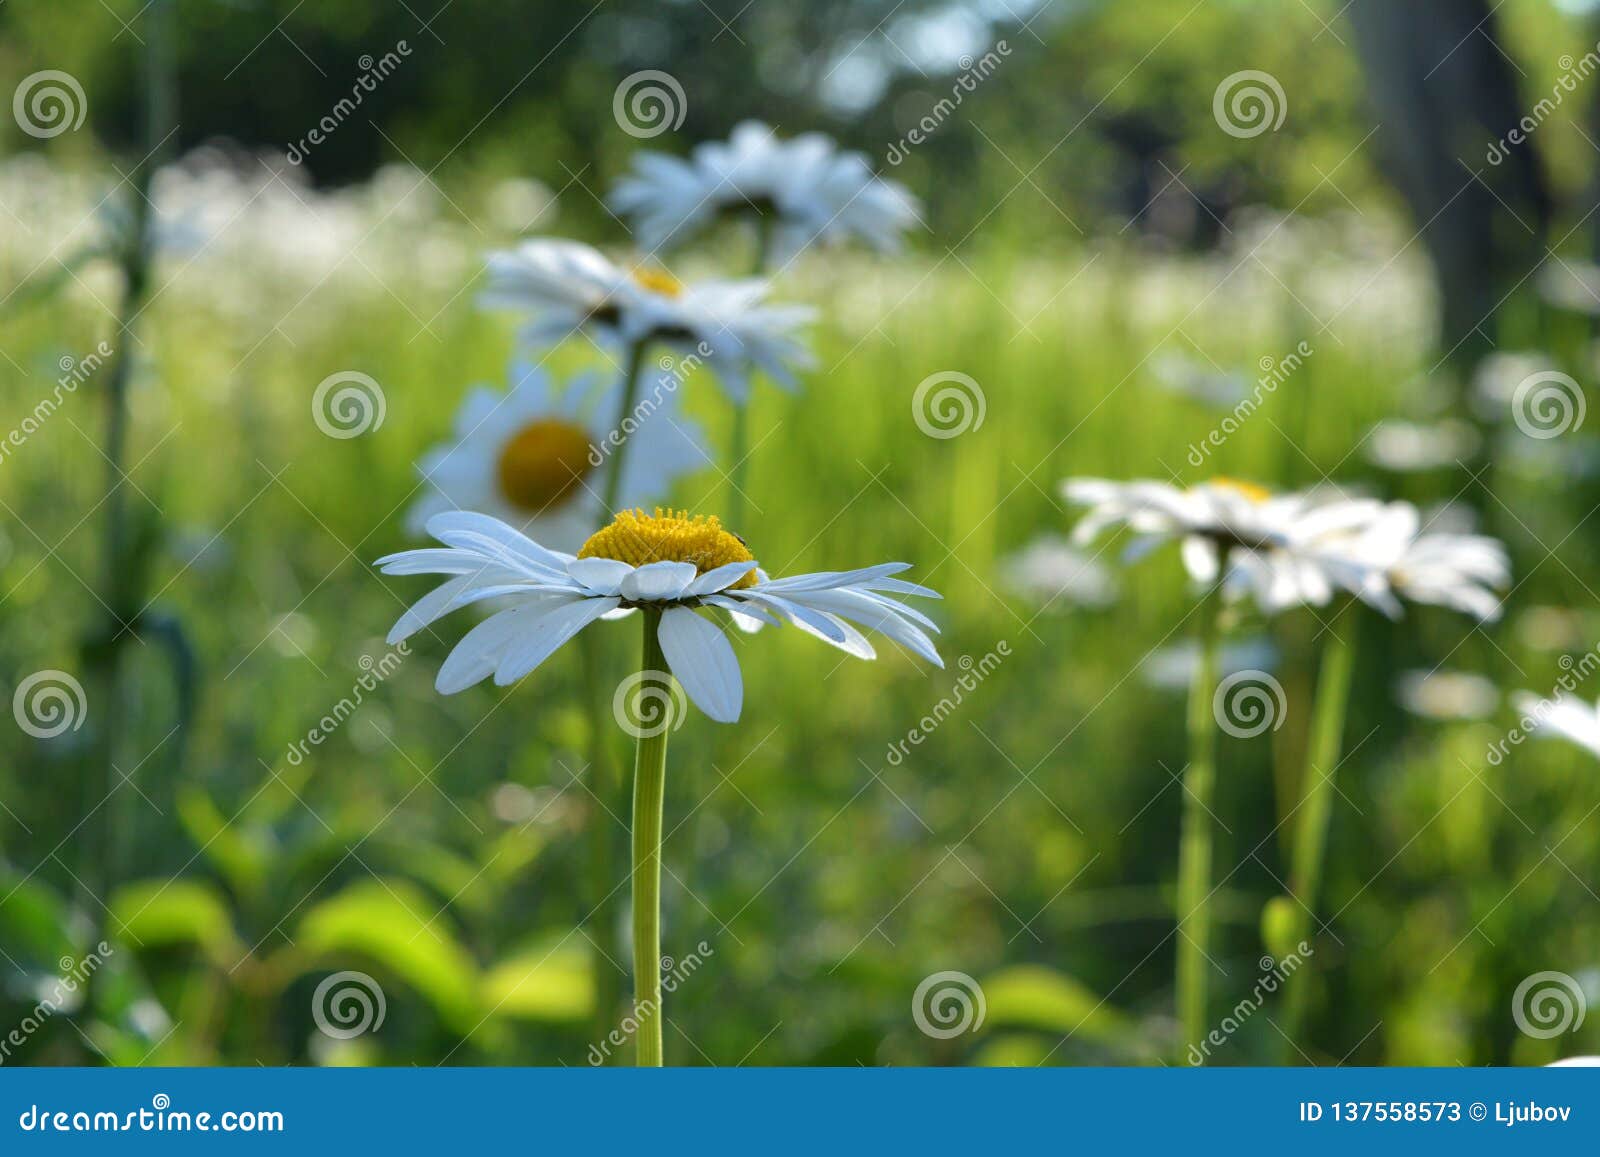 daisies on blurred background of summer garden. beautiful flowers with white petals and yellow cores